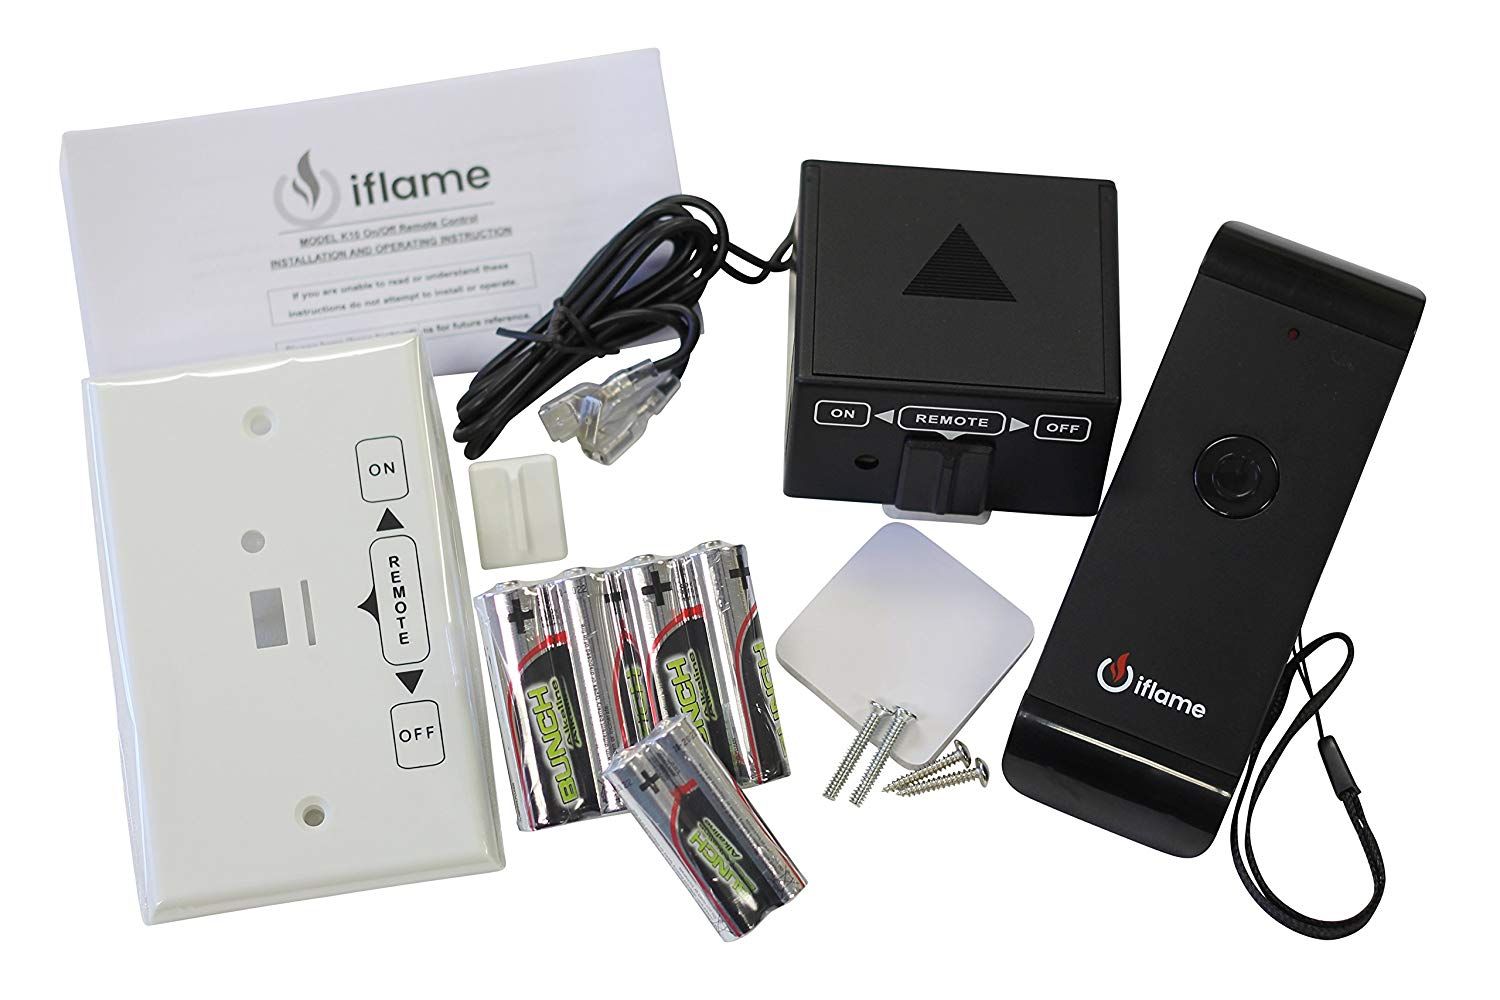 Details about   iFlame ON/OFF Fireplace Remote Control IF-10 Basic 